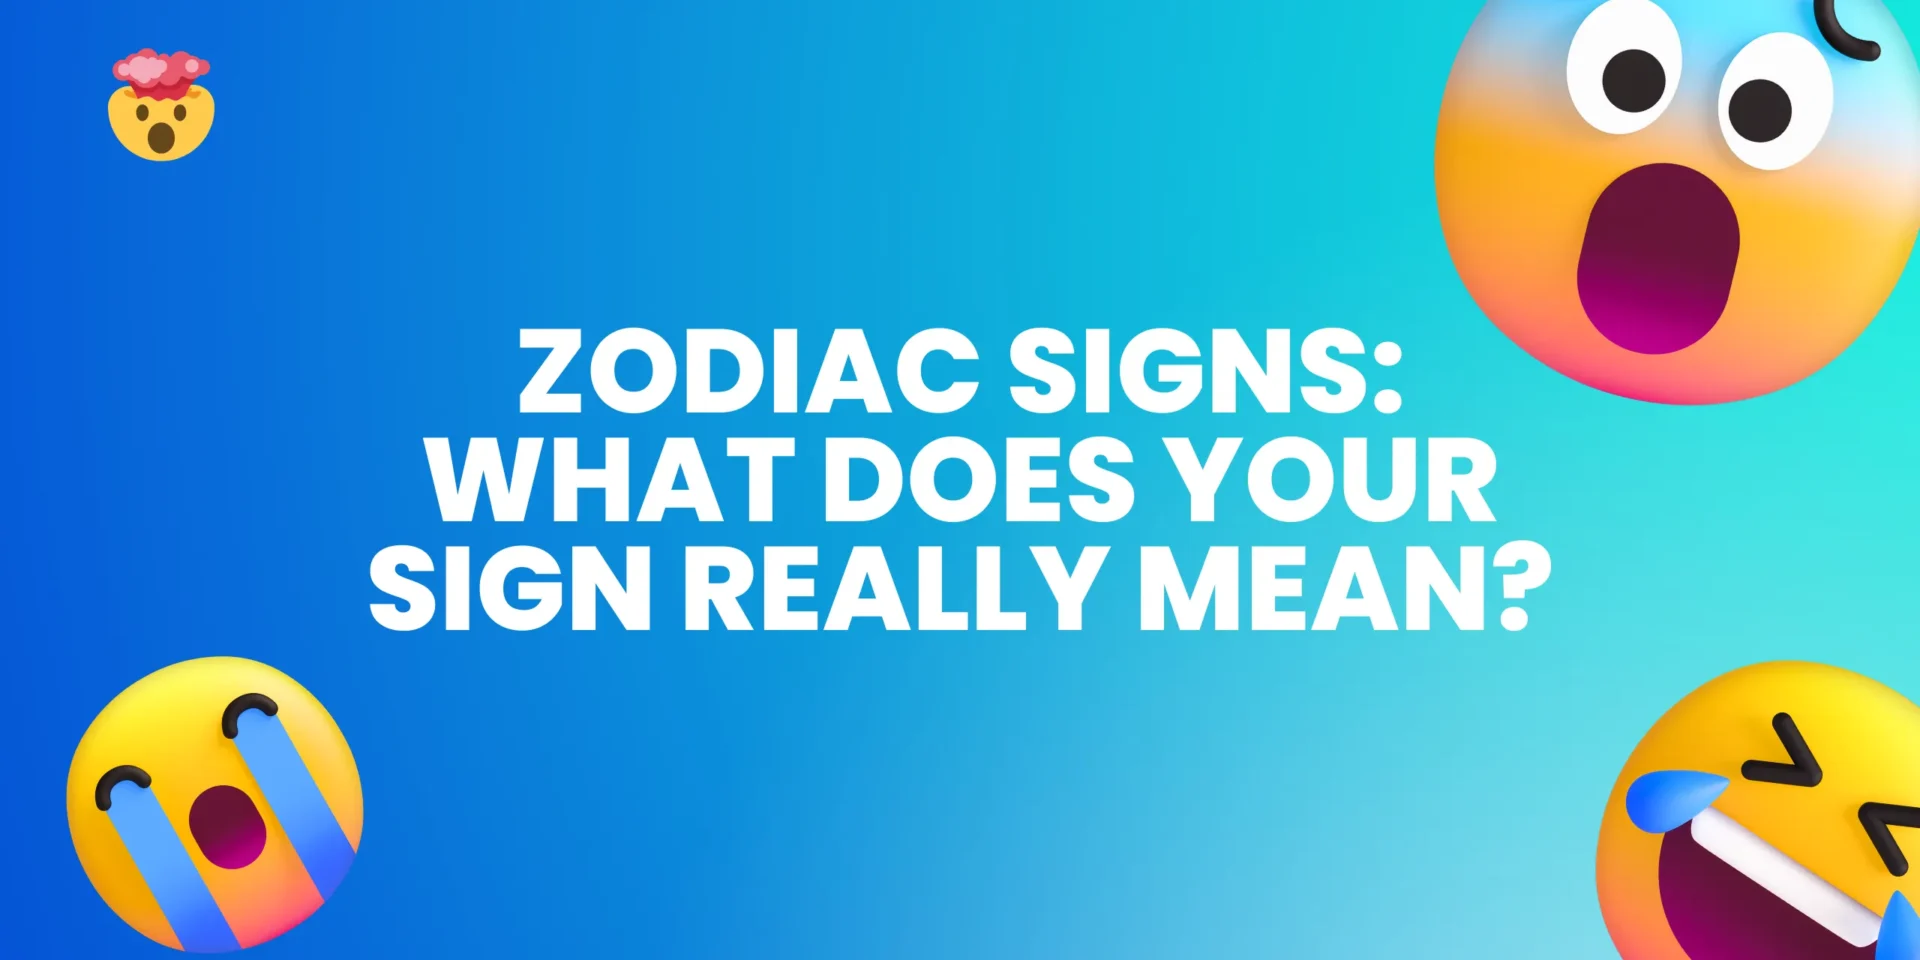 Zodiac Signs: What Does Your Sign Really Mean?